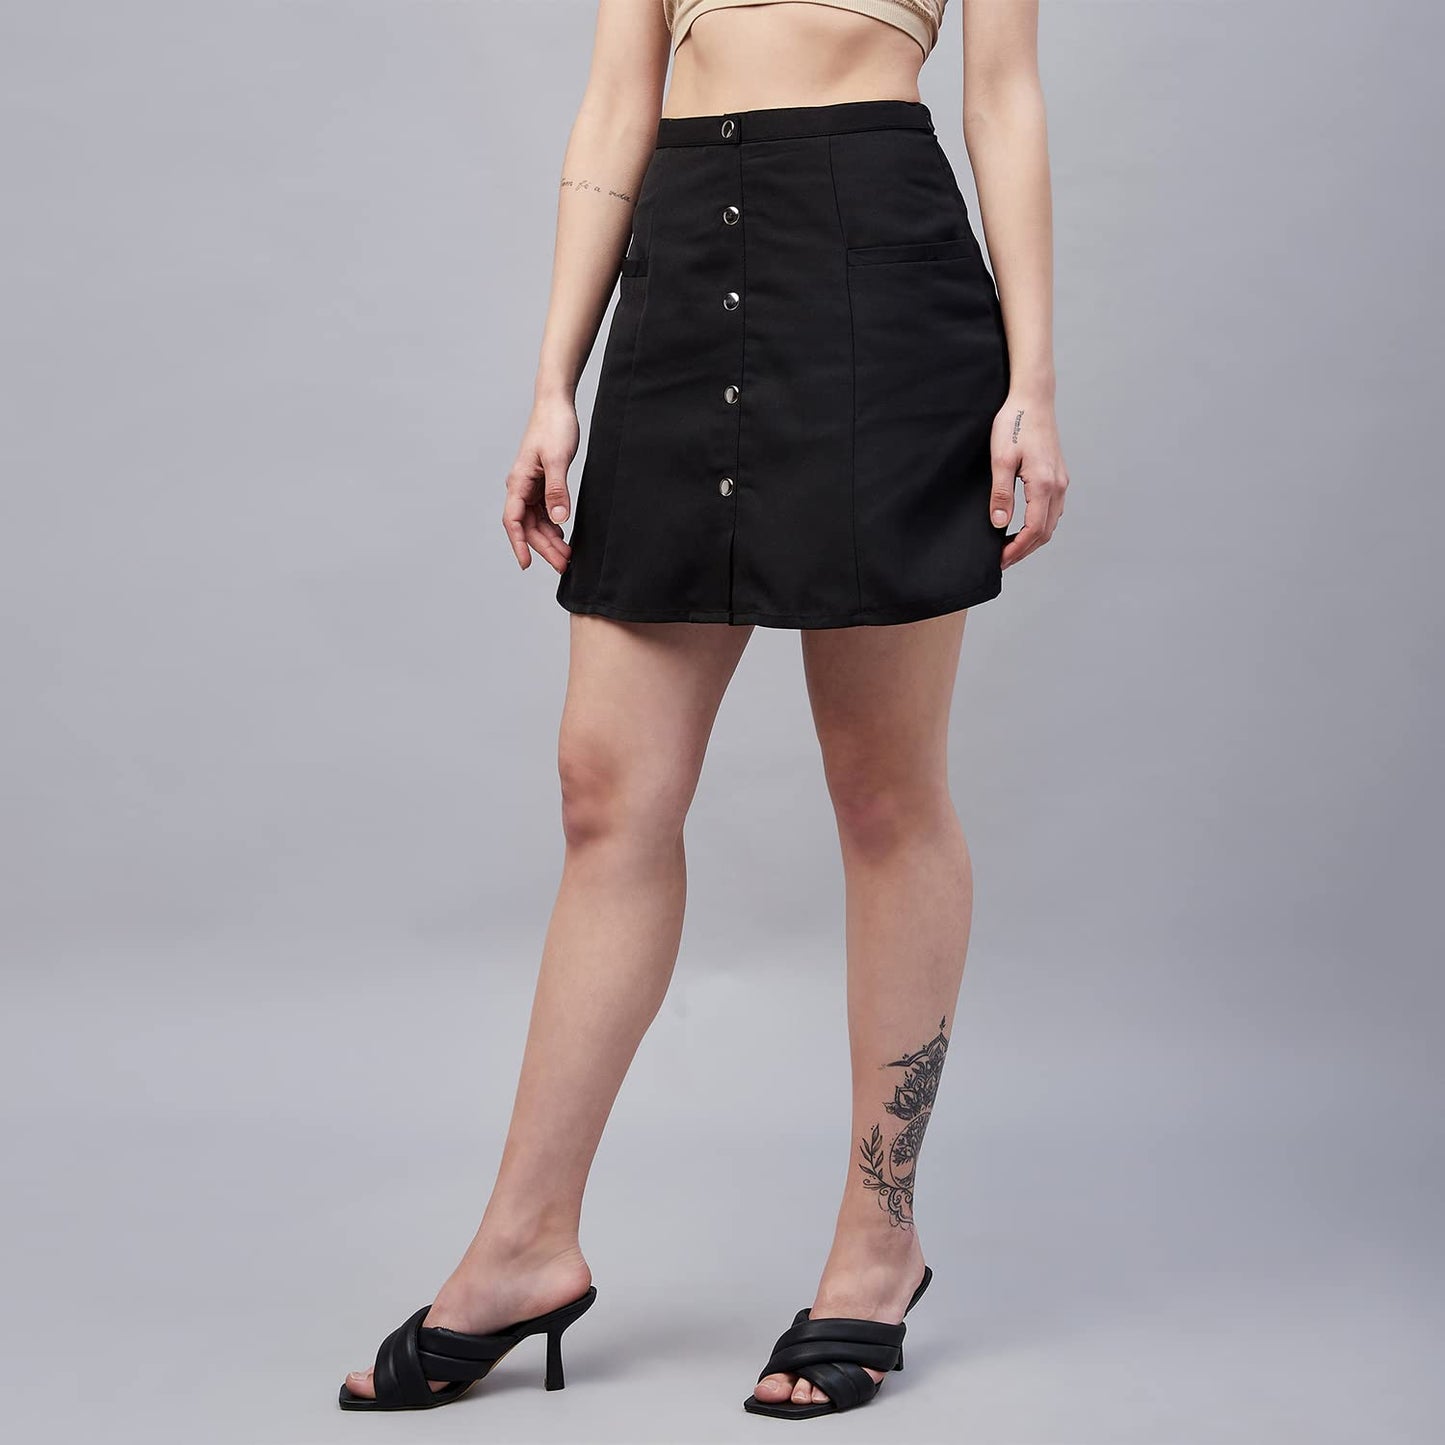 Marie Claire Polyester Western Skirt Black